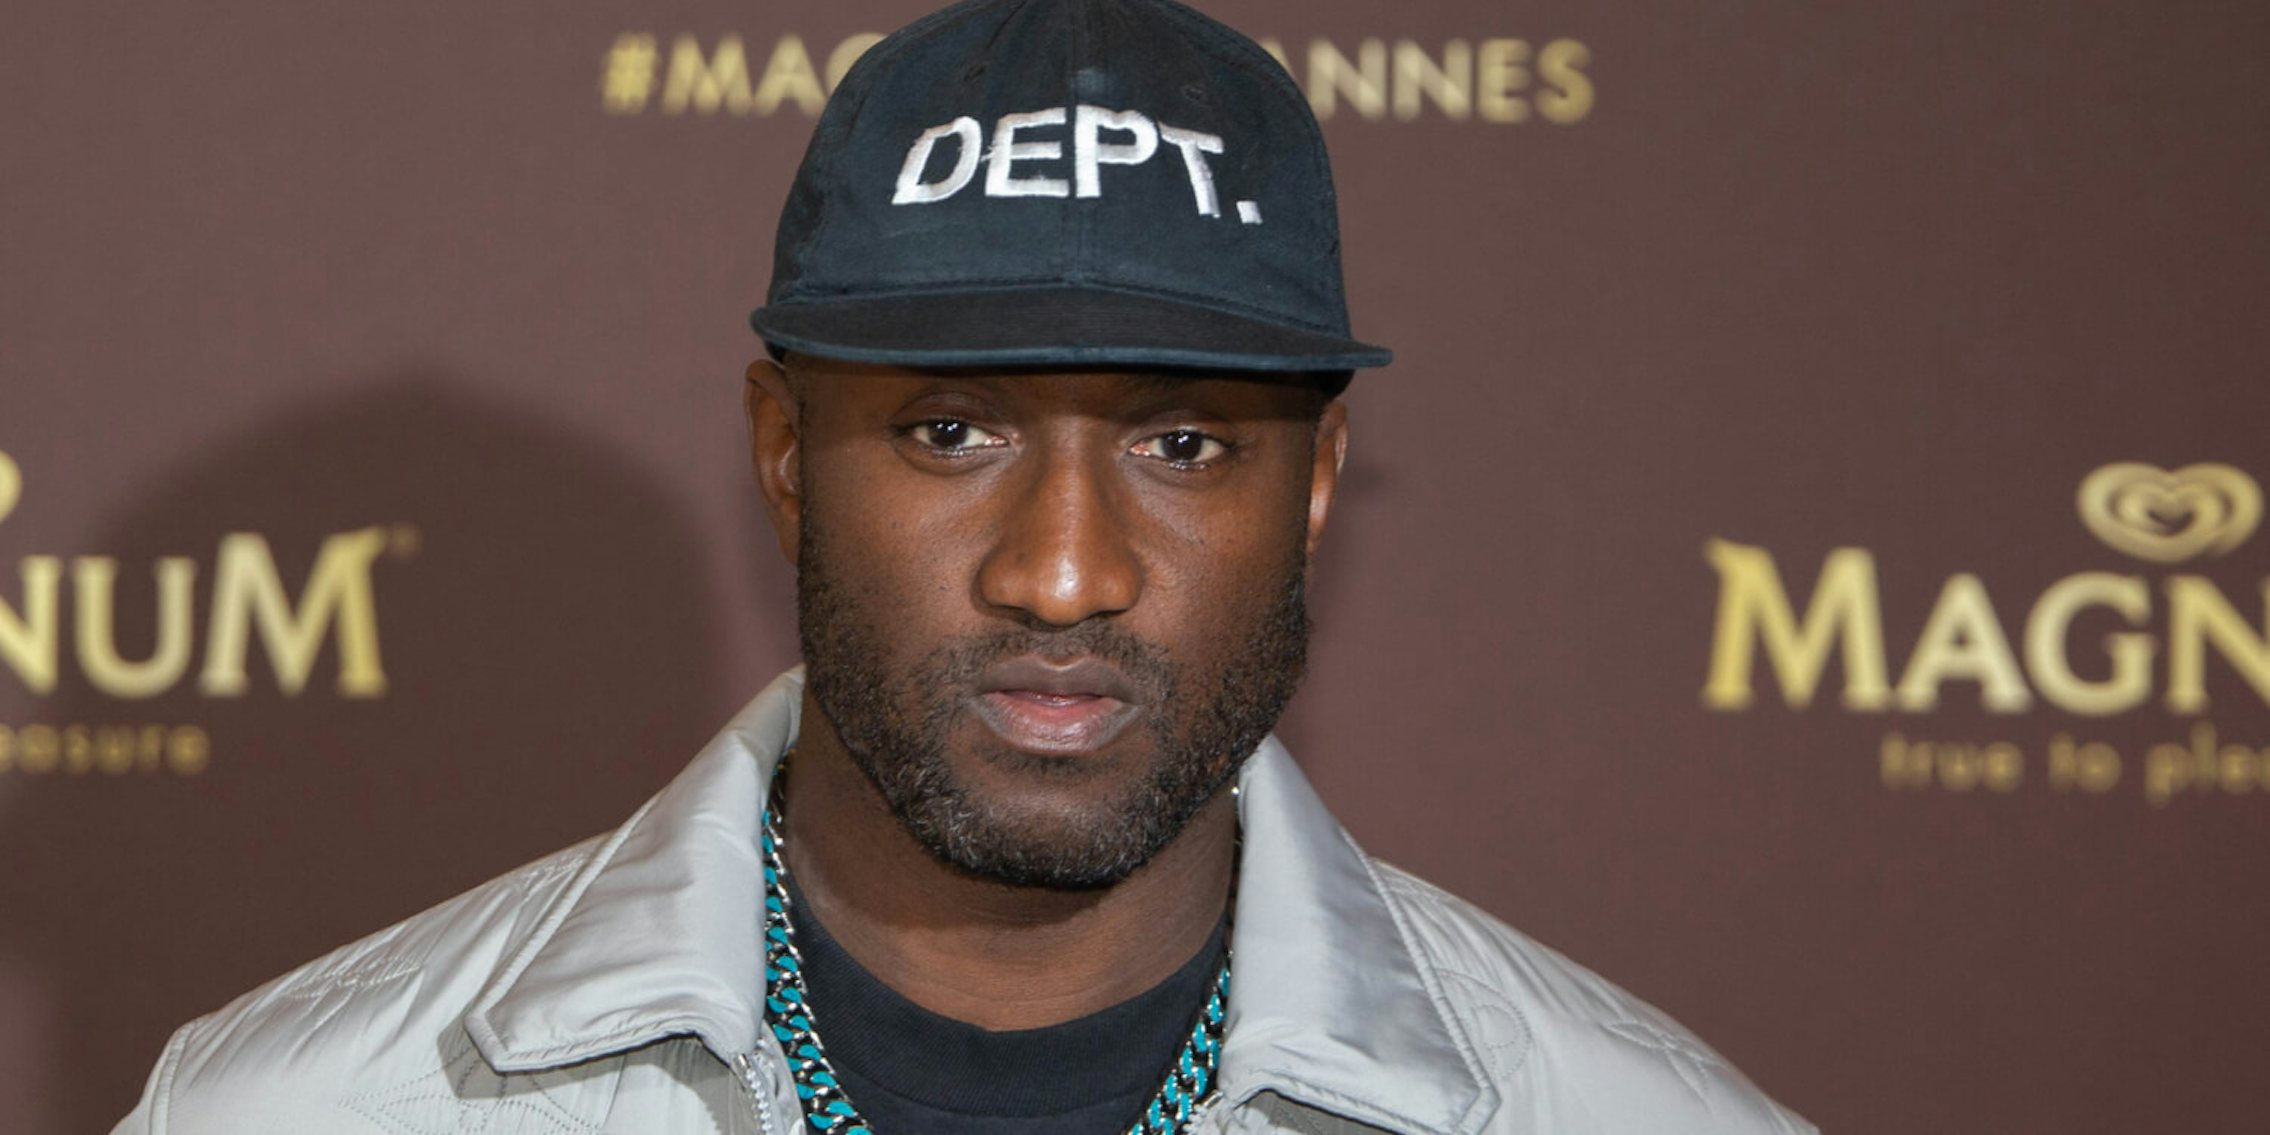 Off-White and Louis Vuitton Designer Virgil Abloh Catches Social Media Heat  for Perceived $50 Donation to Black Lives Matter: Later Apologizes and  Clarifies – Fashion Bomb Daily